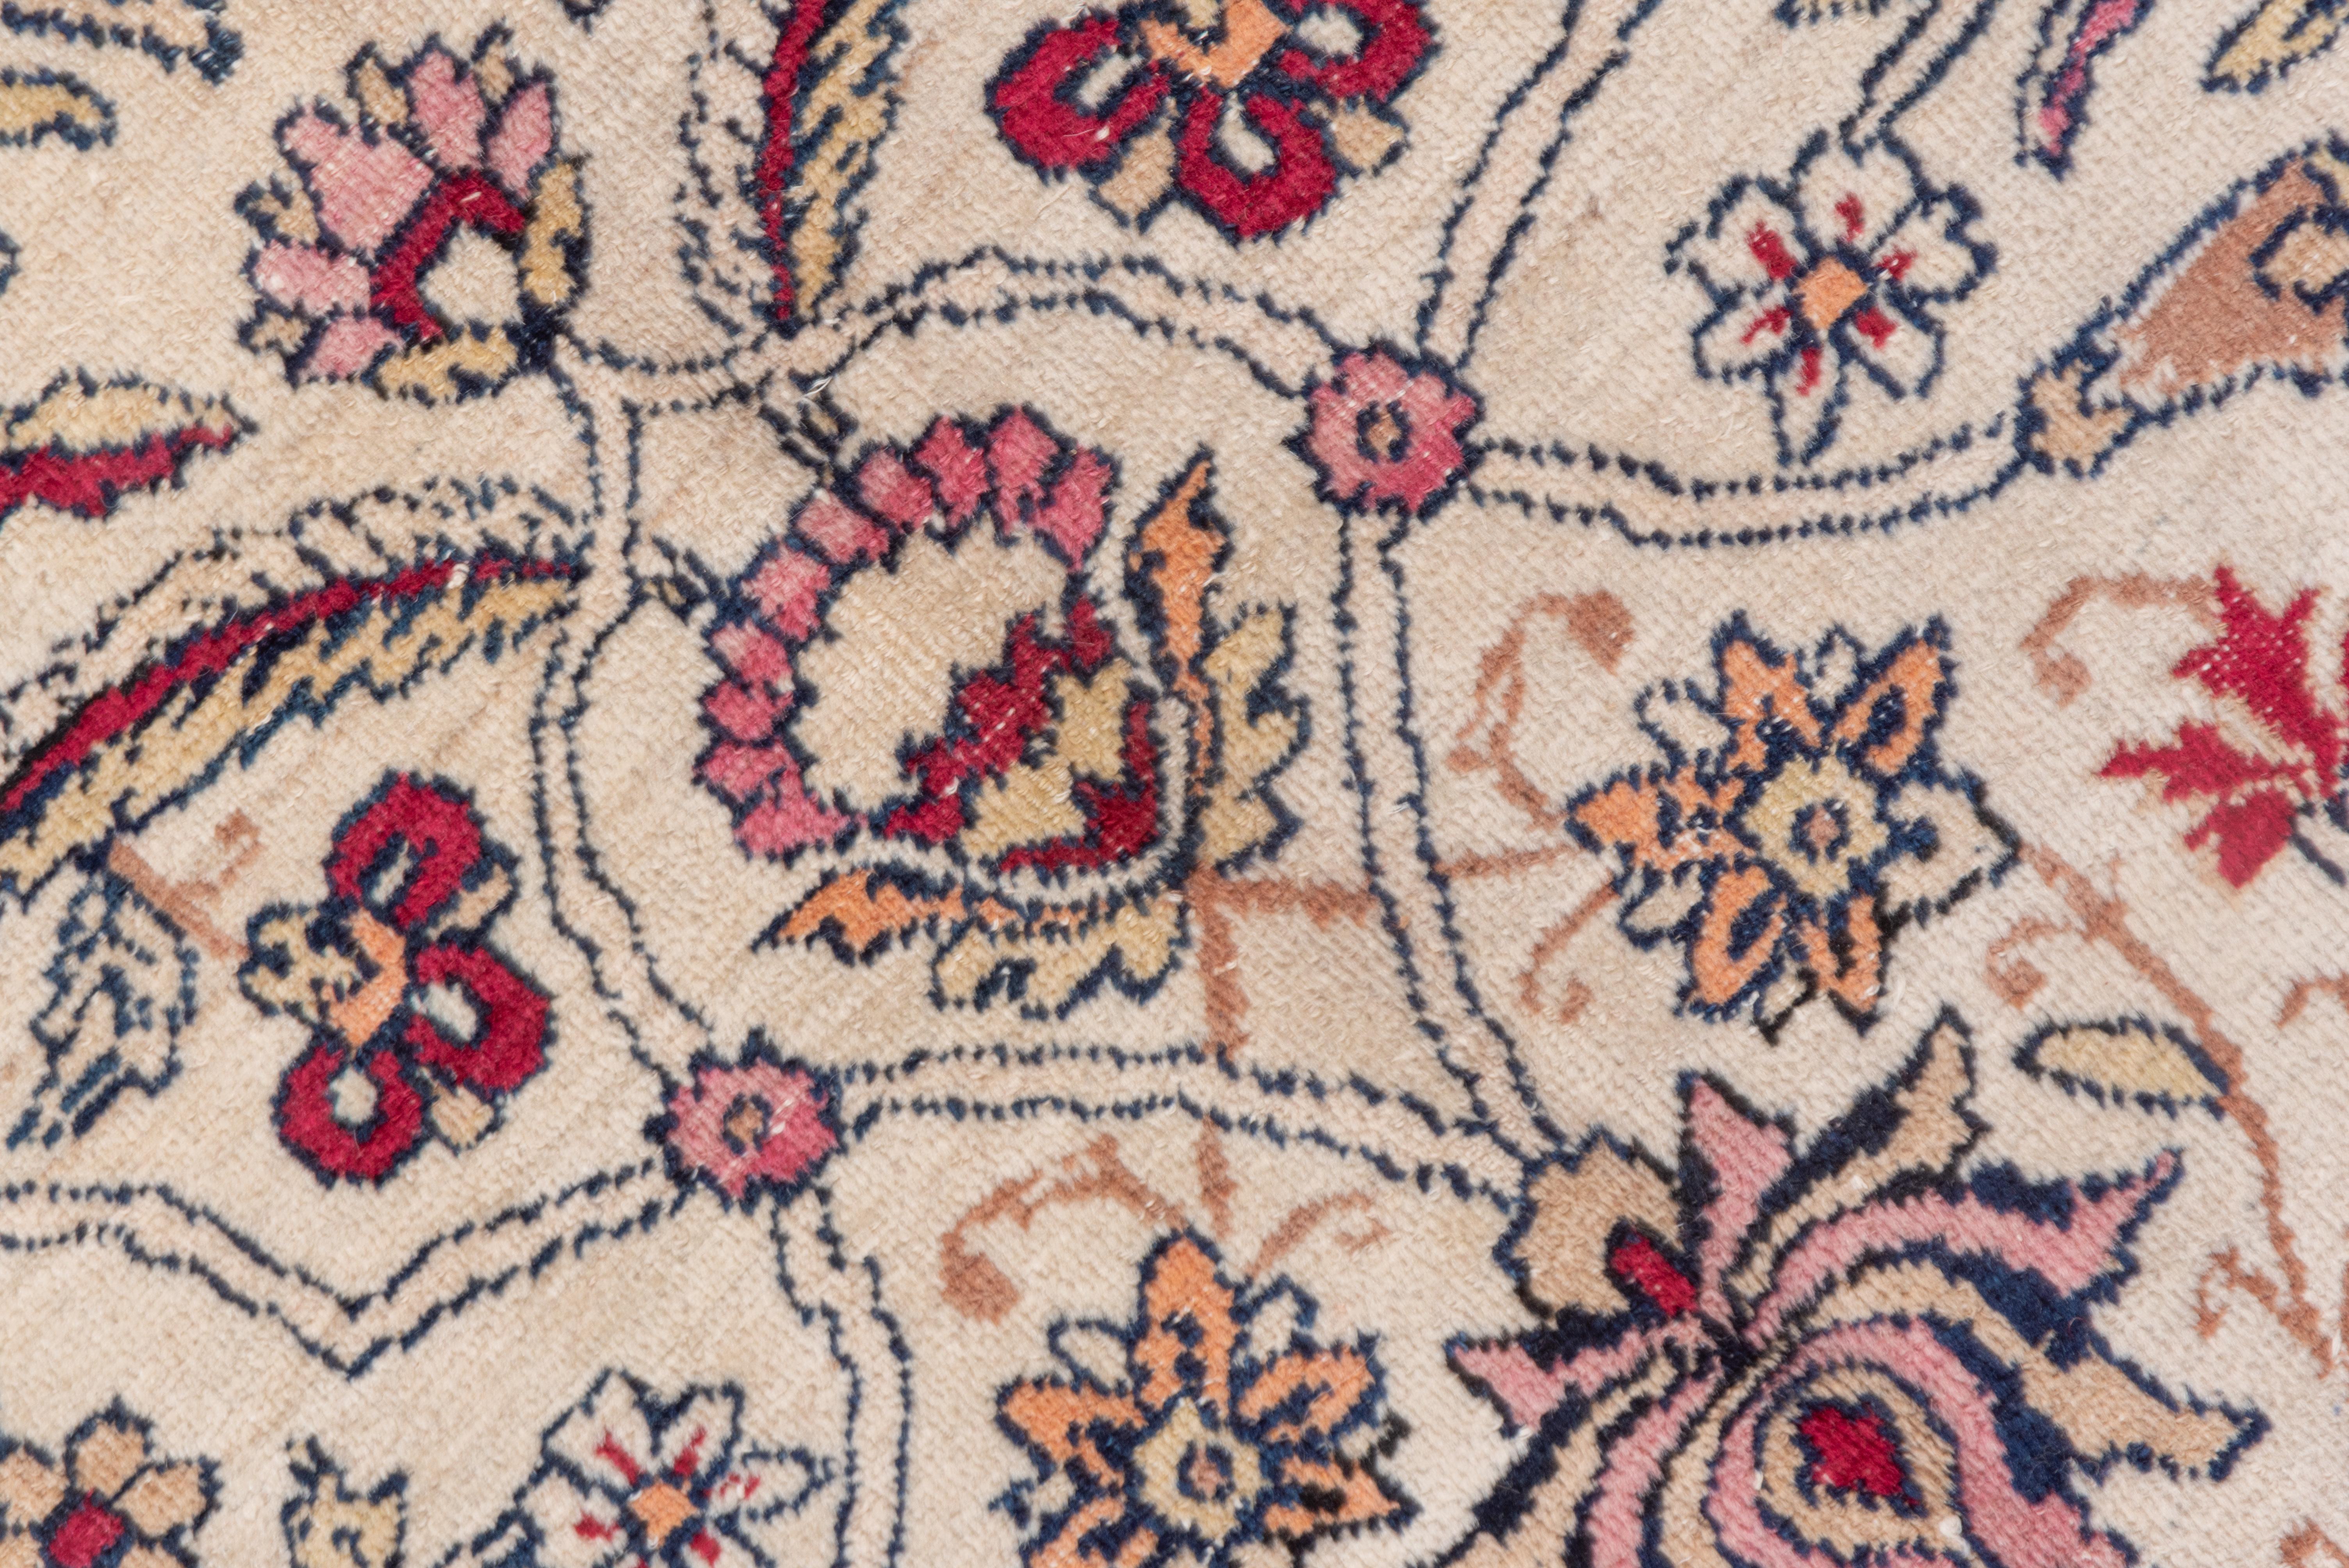 This well-woven SE Persian urban carpet presents an ecru field with an all-over pattern in three discrete columns of small medallions, palmettes, vinery in several levels and various garden flowers, with a wide light palette including soft teal,